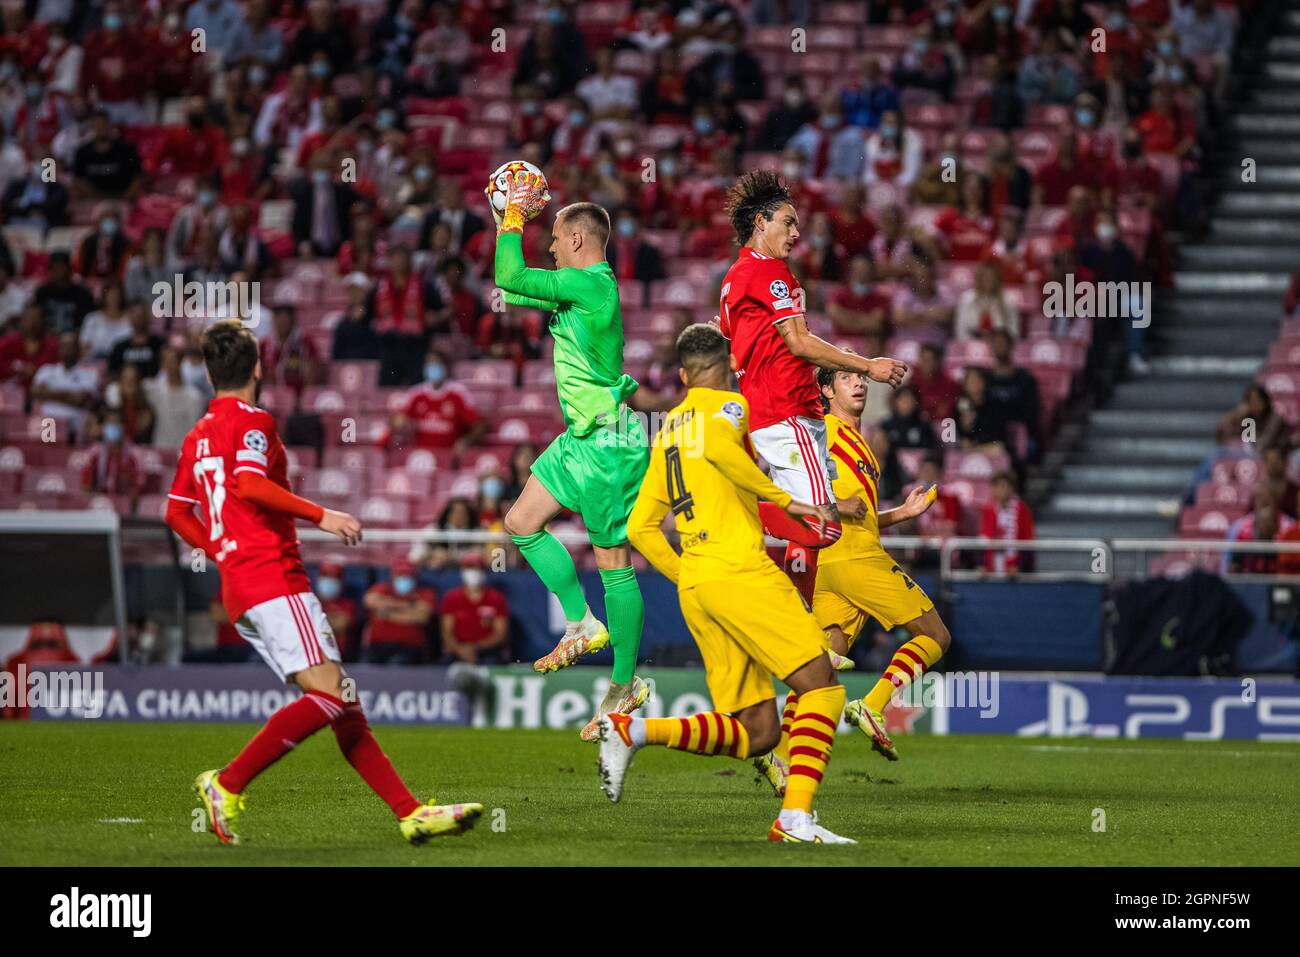 Lisbon, Portugal. 29th Sep, 2021. Goalkeeper Ter Stegen of FC Barcelona in action during the UEFA Champions League group E match between SL Benfica and FC Barcelona at Estádio do Sport Lisboa e Benfica.Final score; Benfica 3:0 Barcelona. Credit: SOPA Images Limited/Alamy Live News Stock Photo